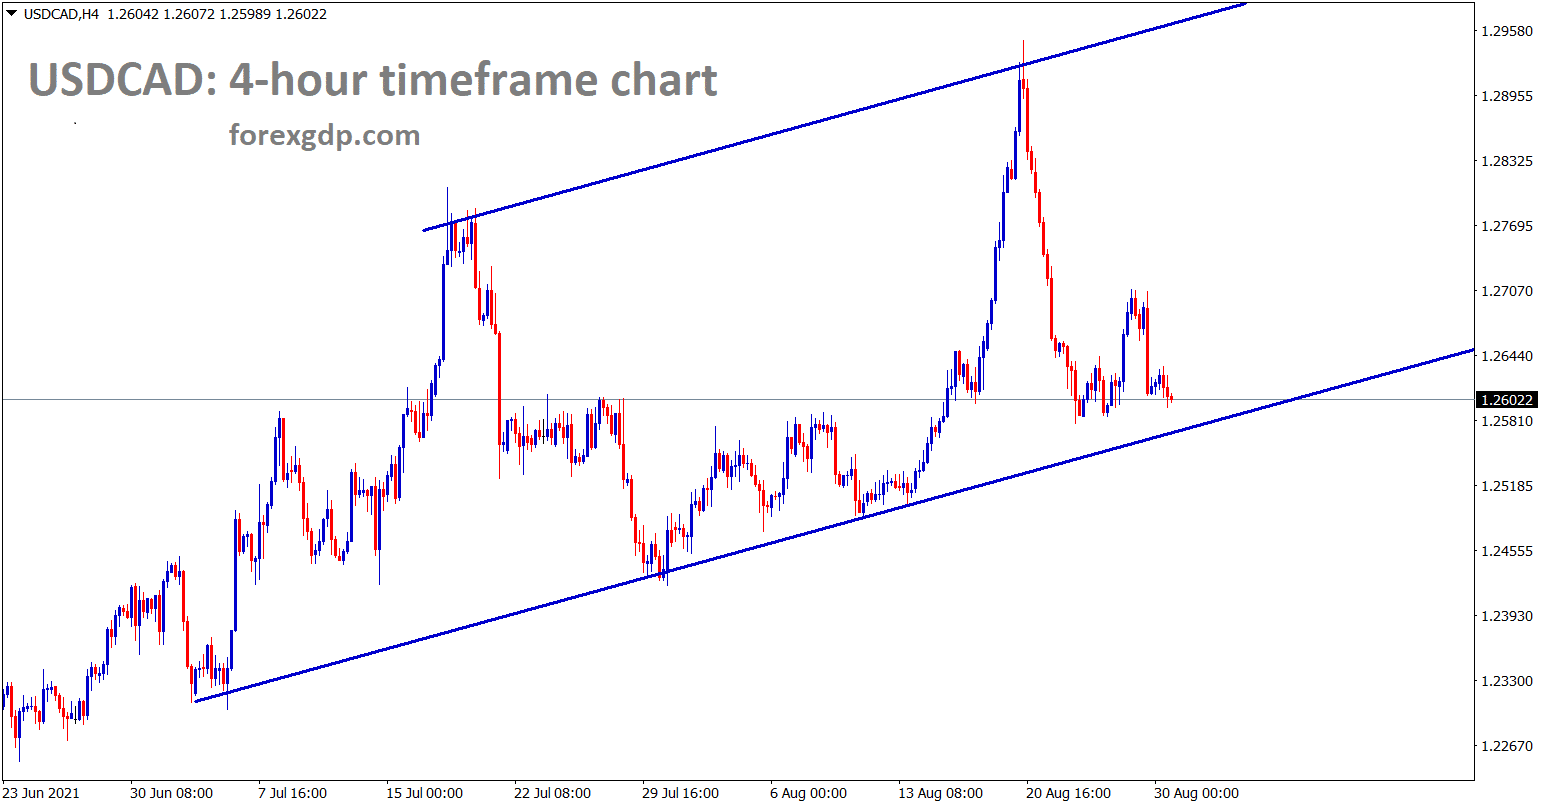 USDCAD is going to reach the higher low of uptrend line in the h4 chart